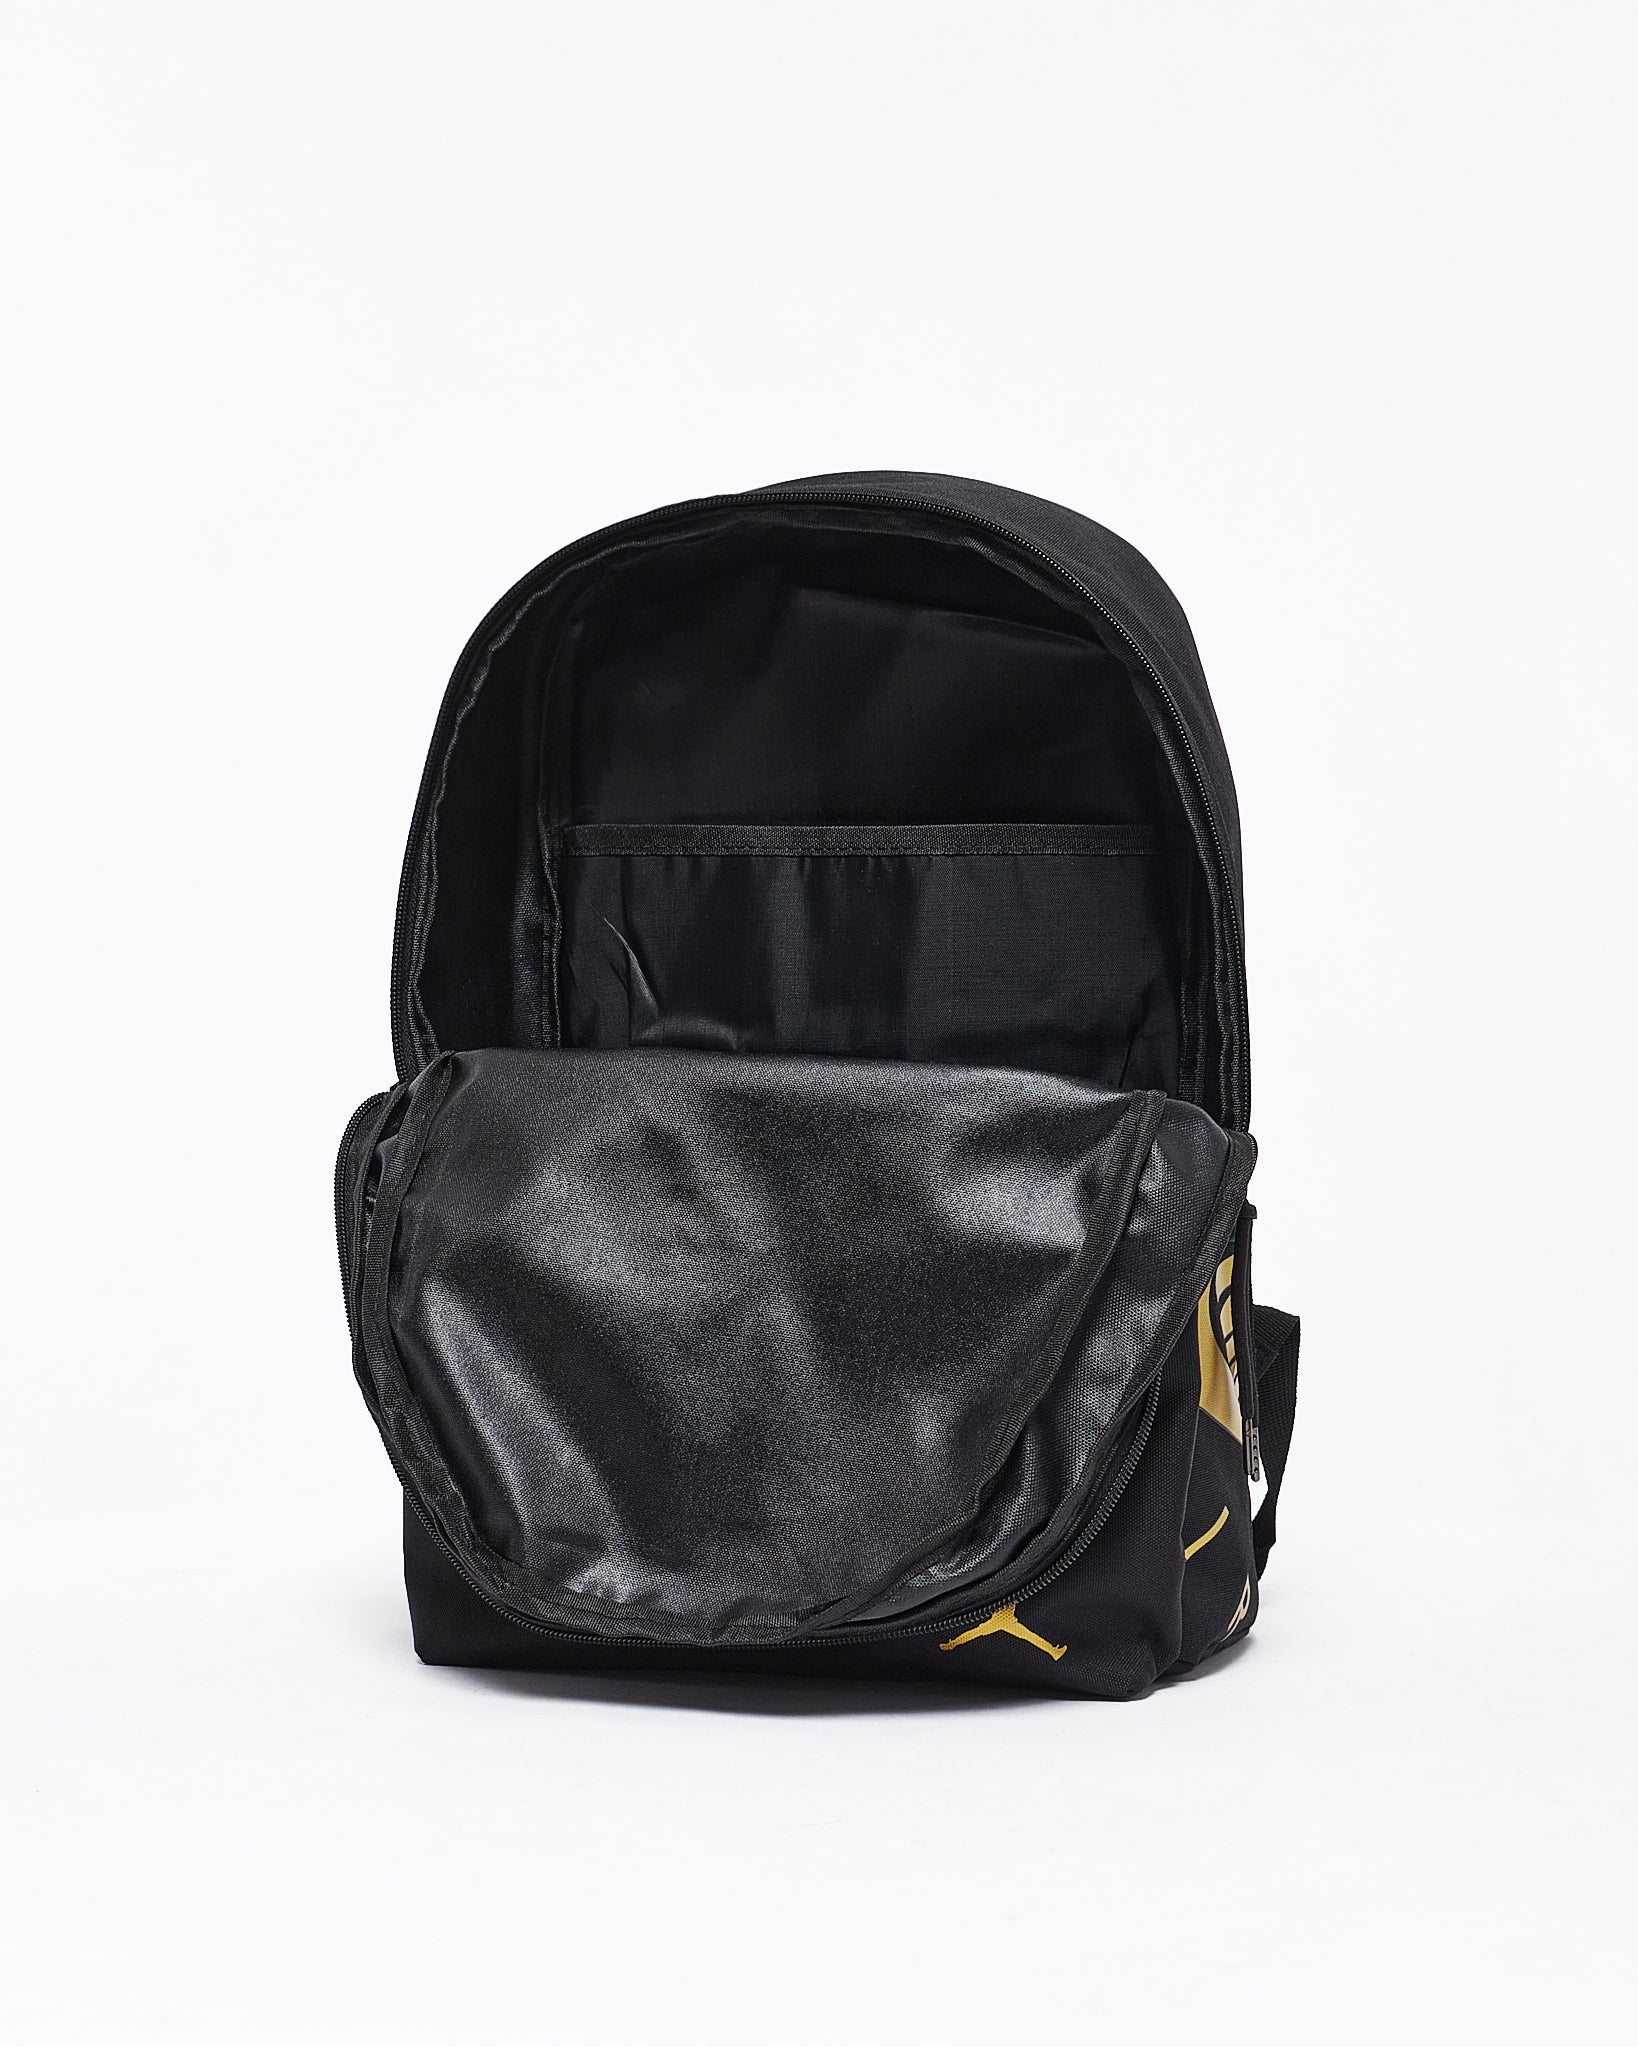 MOI OUTFIT-Gold Logo Printed Unisex Backpack 20.90